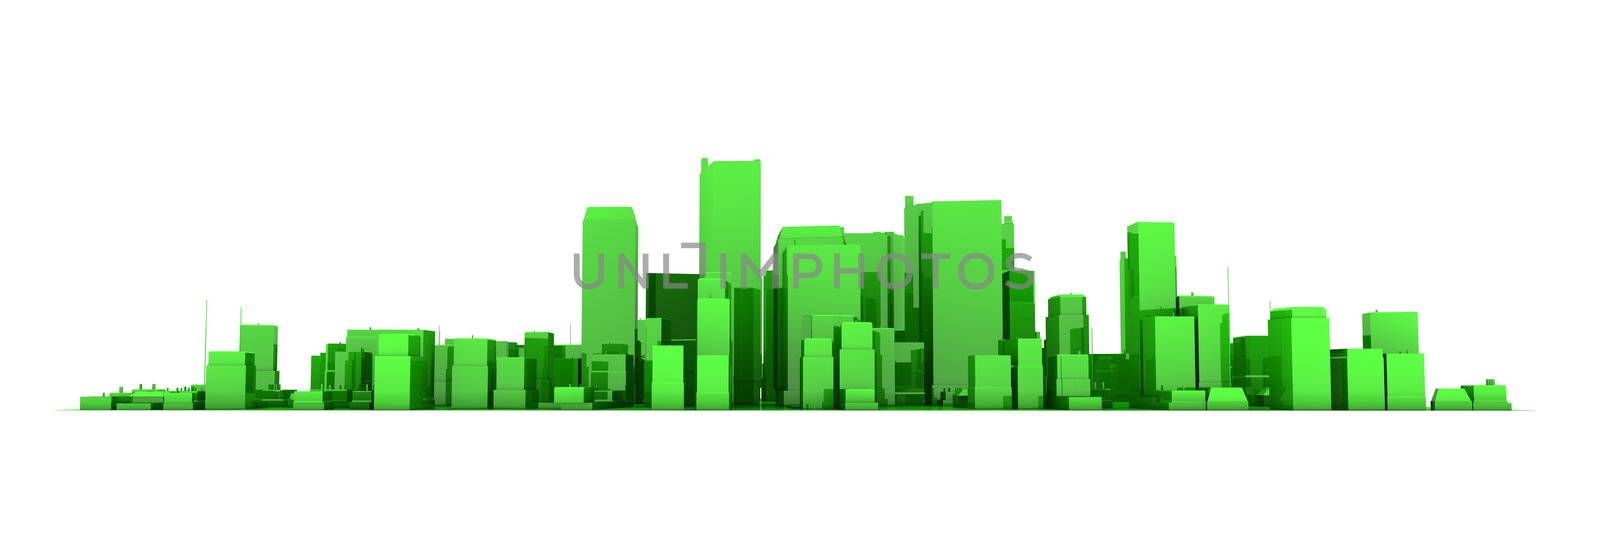 Wide Cityscape Model 3D - Shiny Green City White Background by PixBox